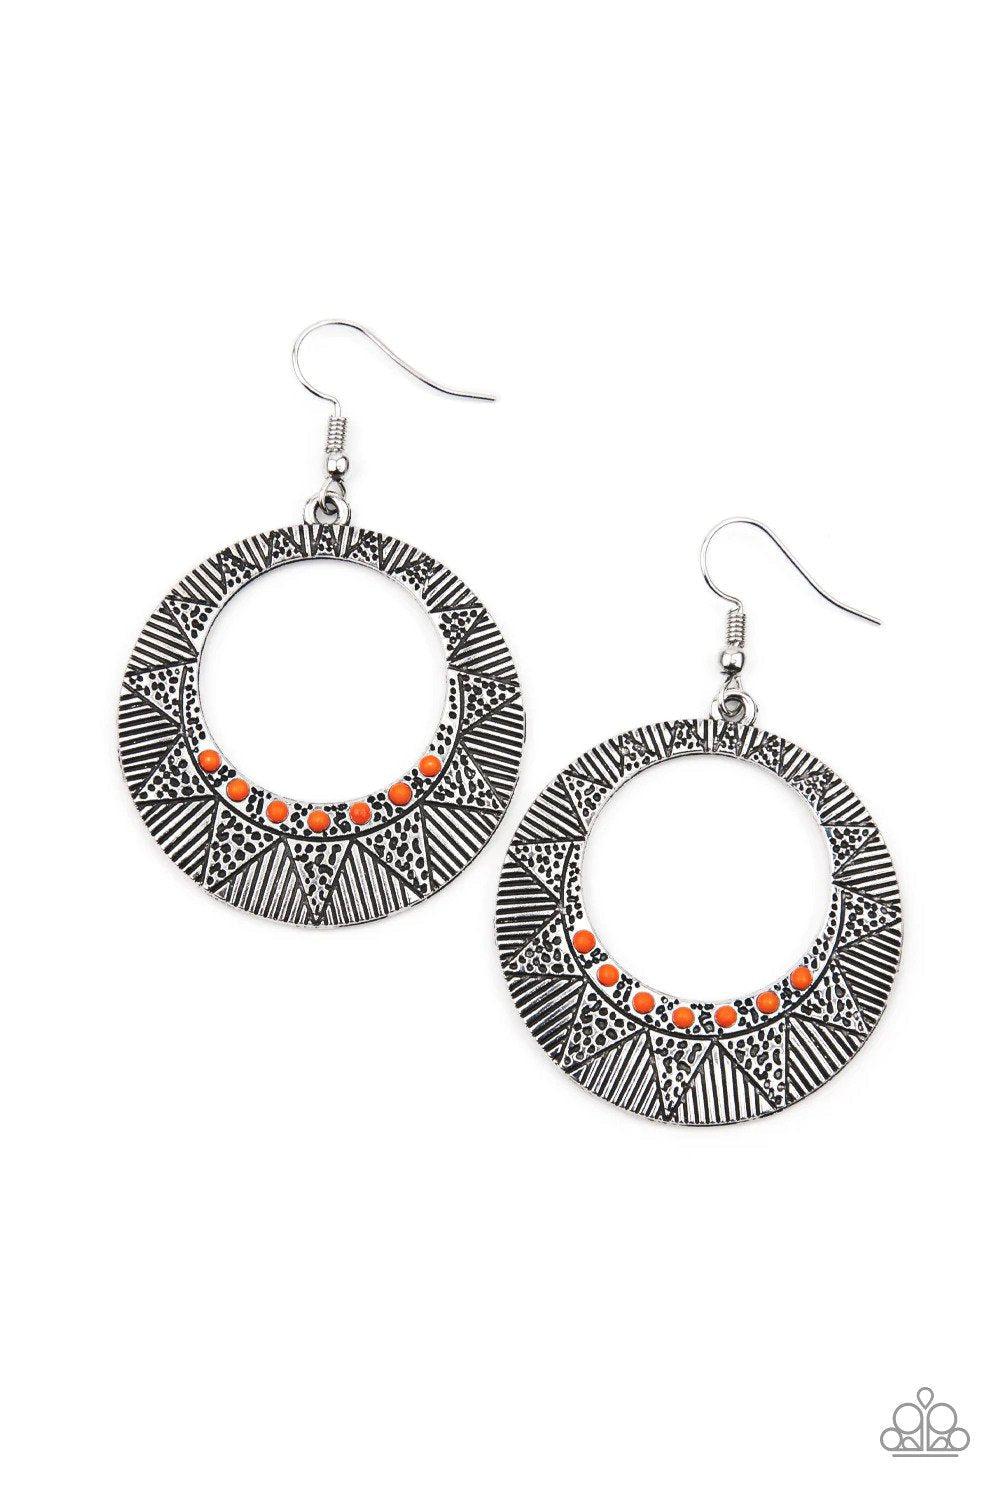 Adobe Dusk Orange and Silver Earrings - Paparazzi Accessories- lightbox - CarasShop.com - $5 Jewelry by Cara Jewels